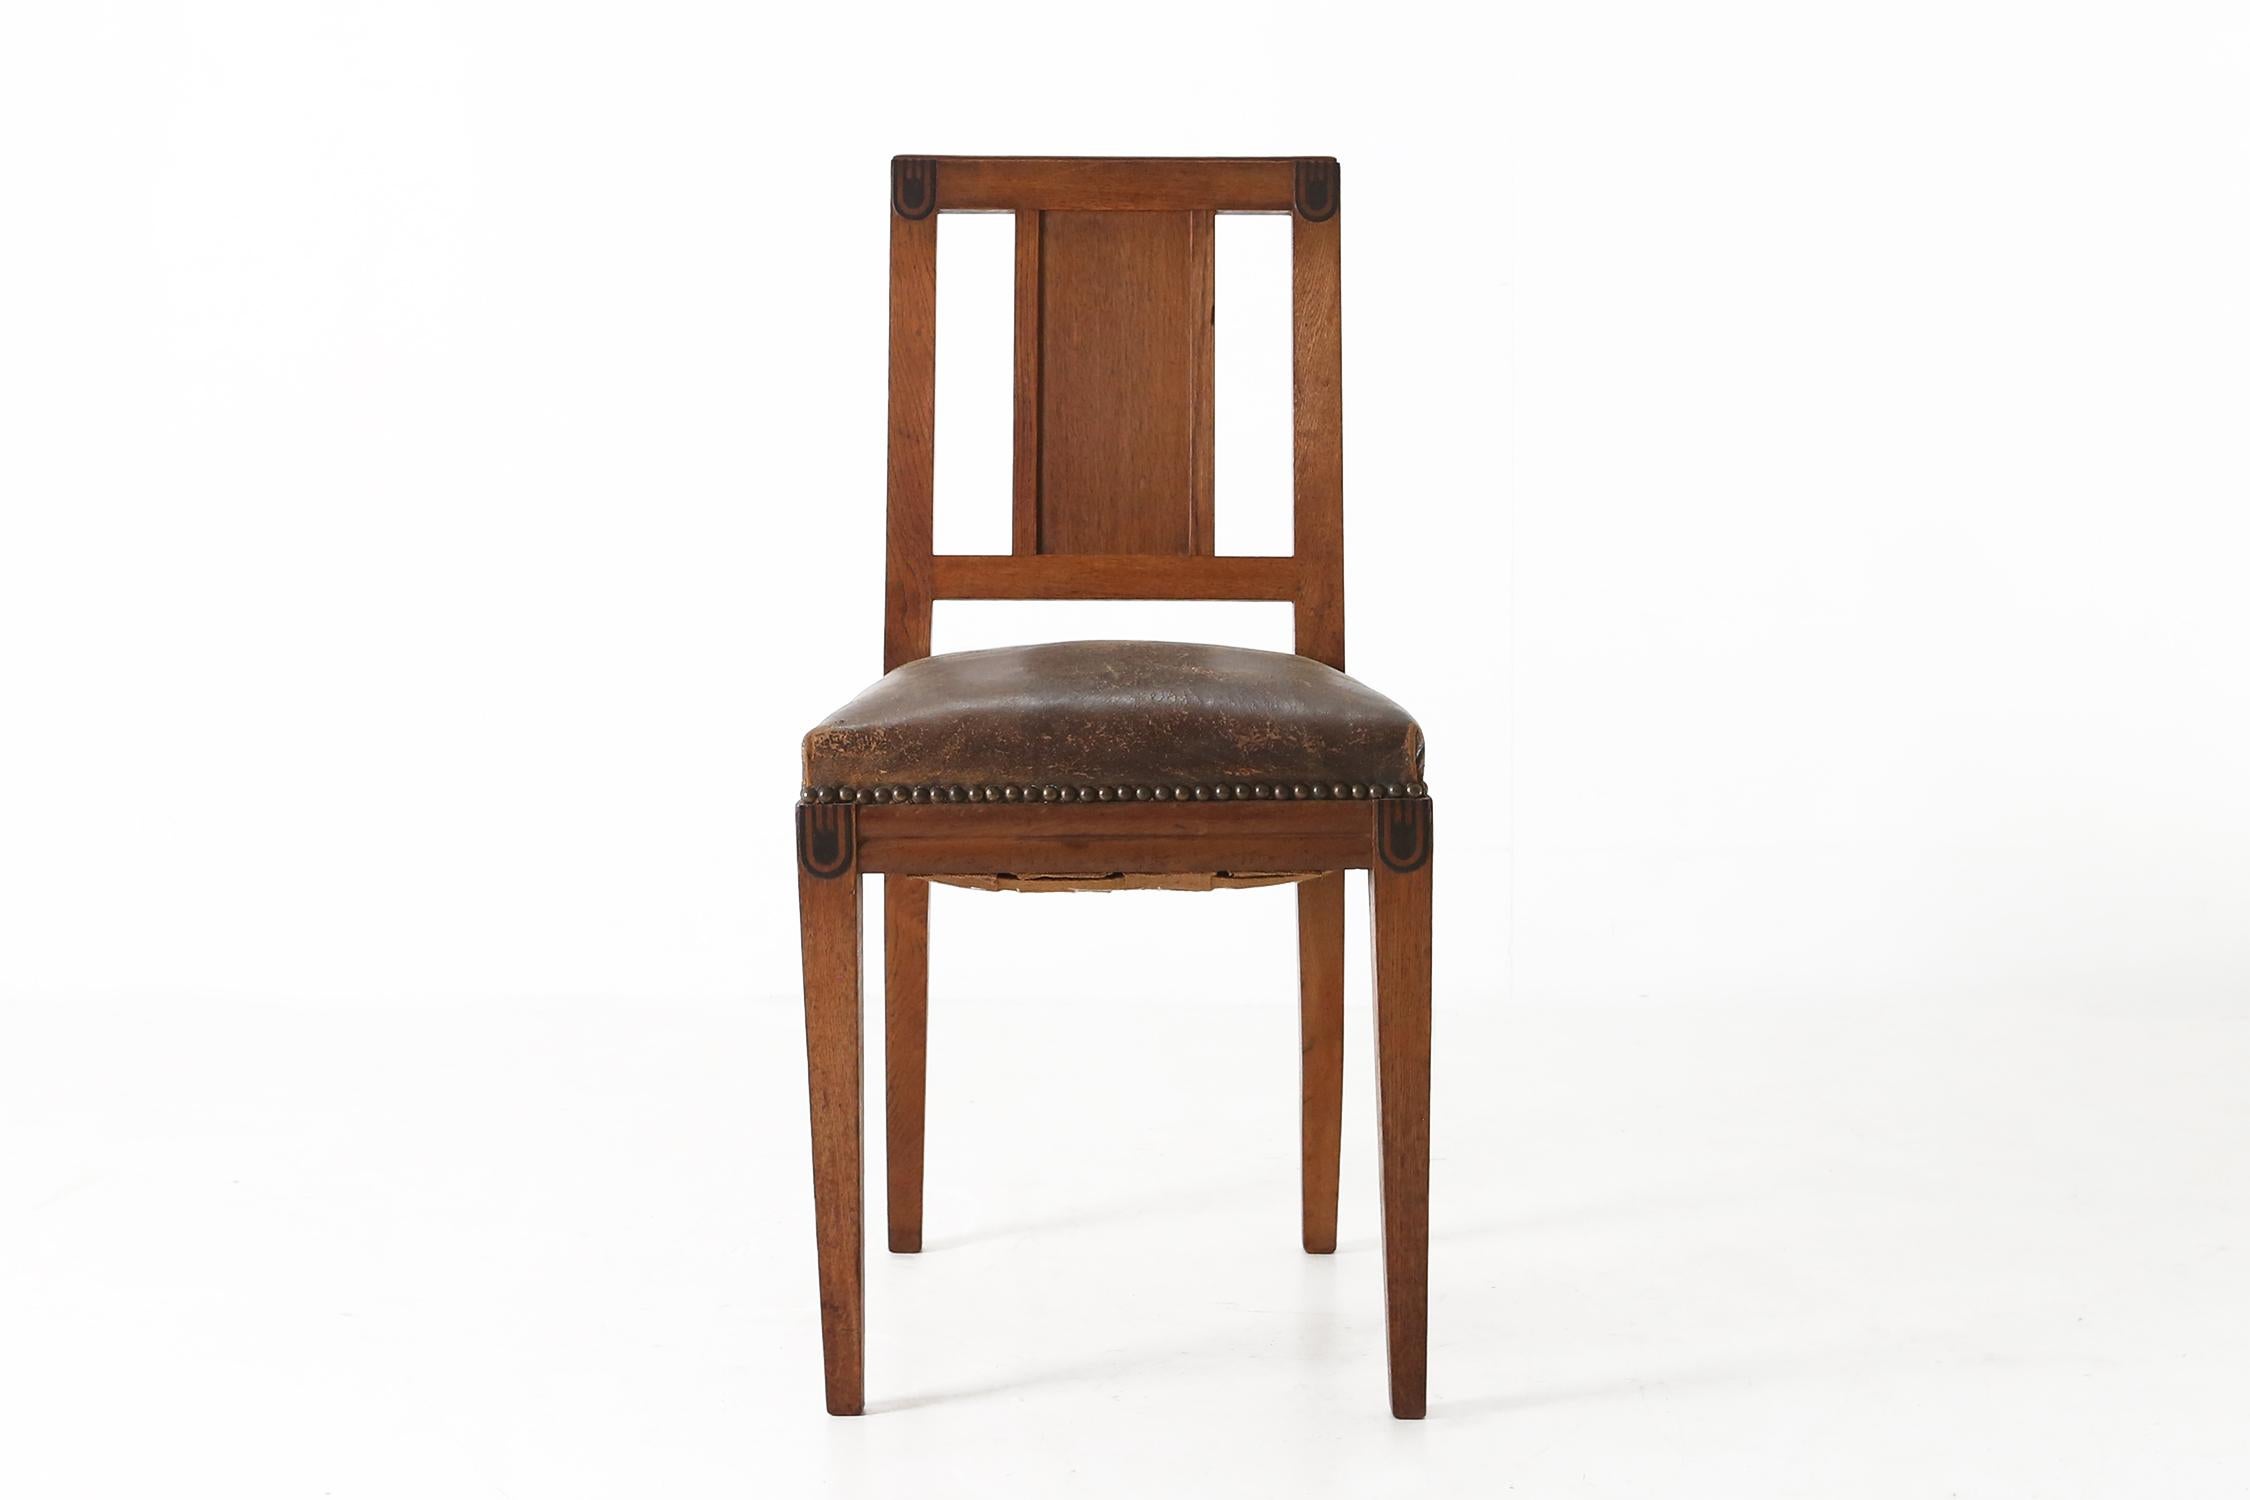 Art Deco chair designed by the French designer Maurice Dufrene
for the 1925 Paris Exposition International of Arts Décoratifs et Industriels Modernes.
Made of oak and leather.

Dufrene is one of the most important designers of the Art Deco